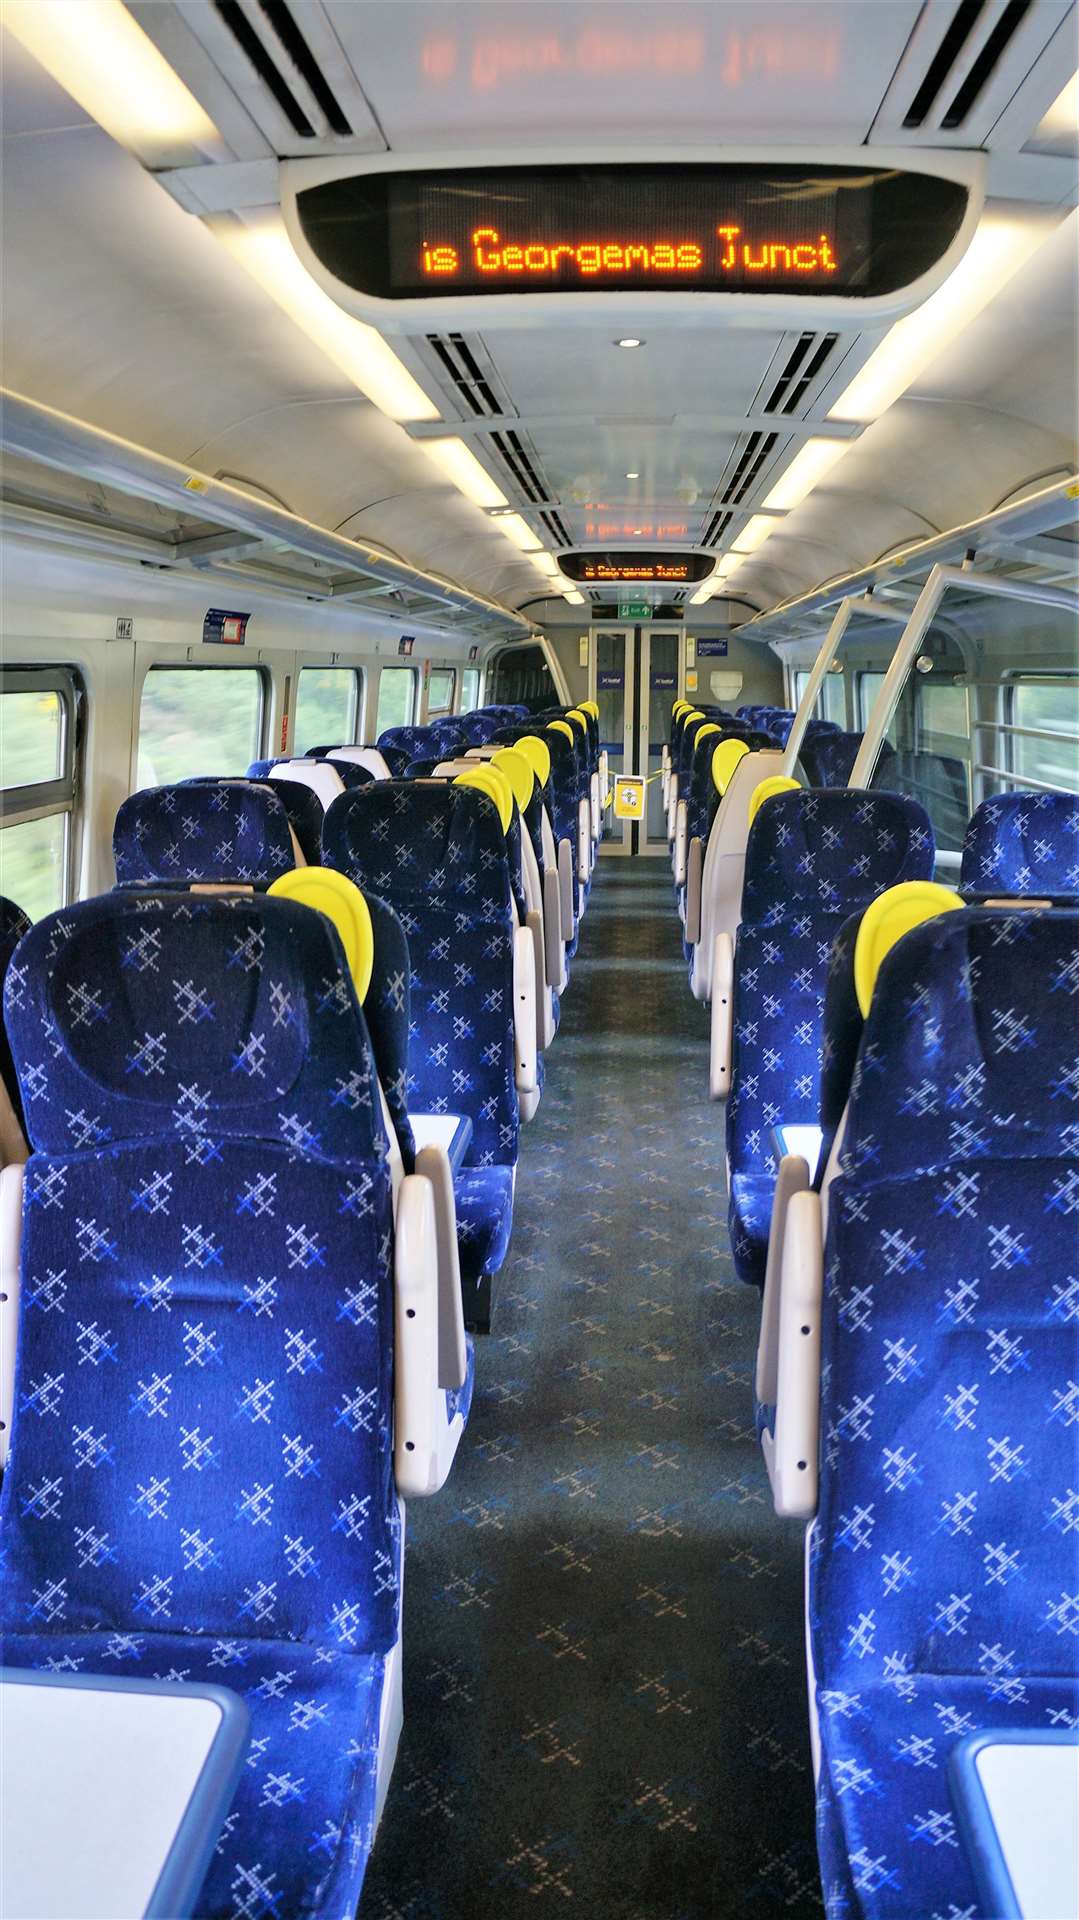 Special teams will deal with ticket dodgers and antisocial behaviour on trains. Picture: DGS